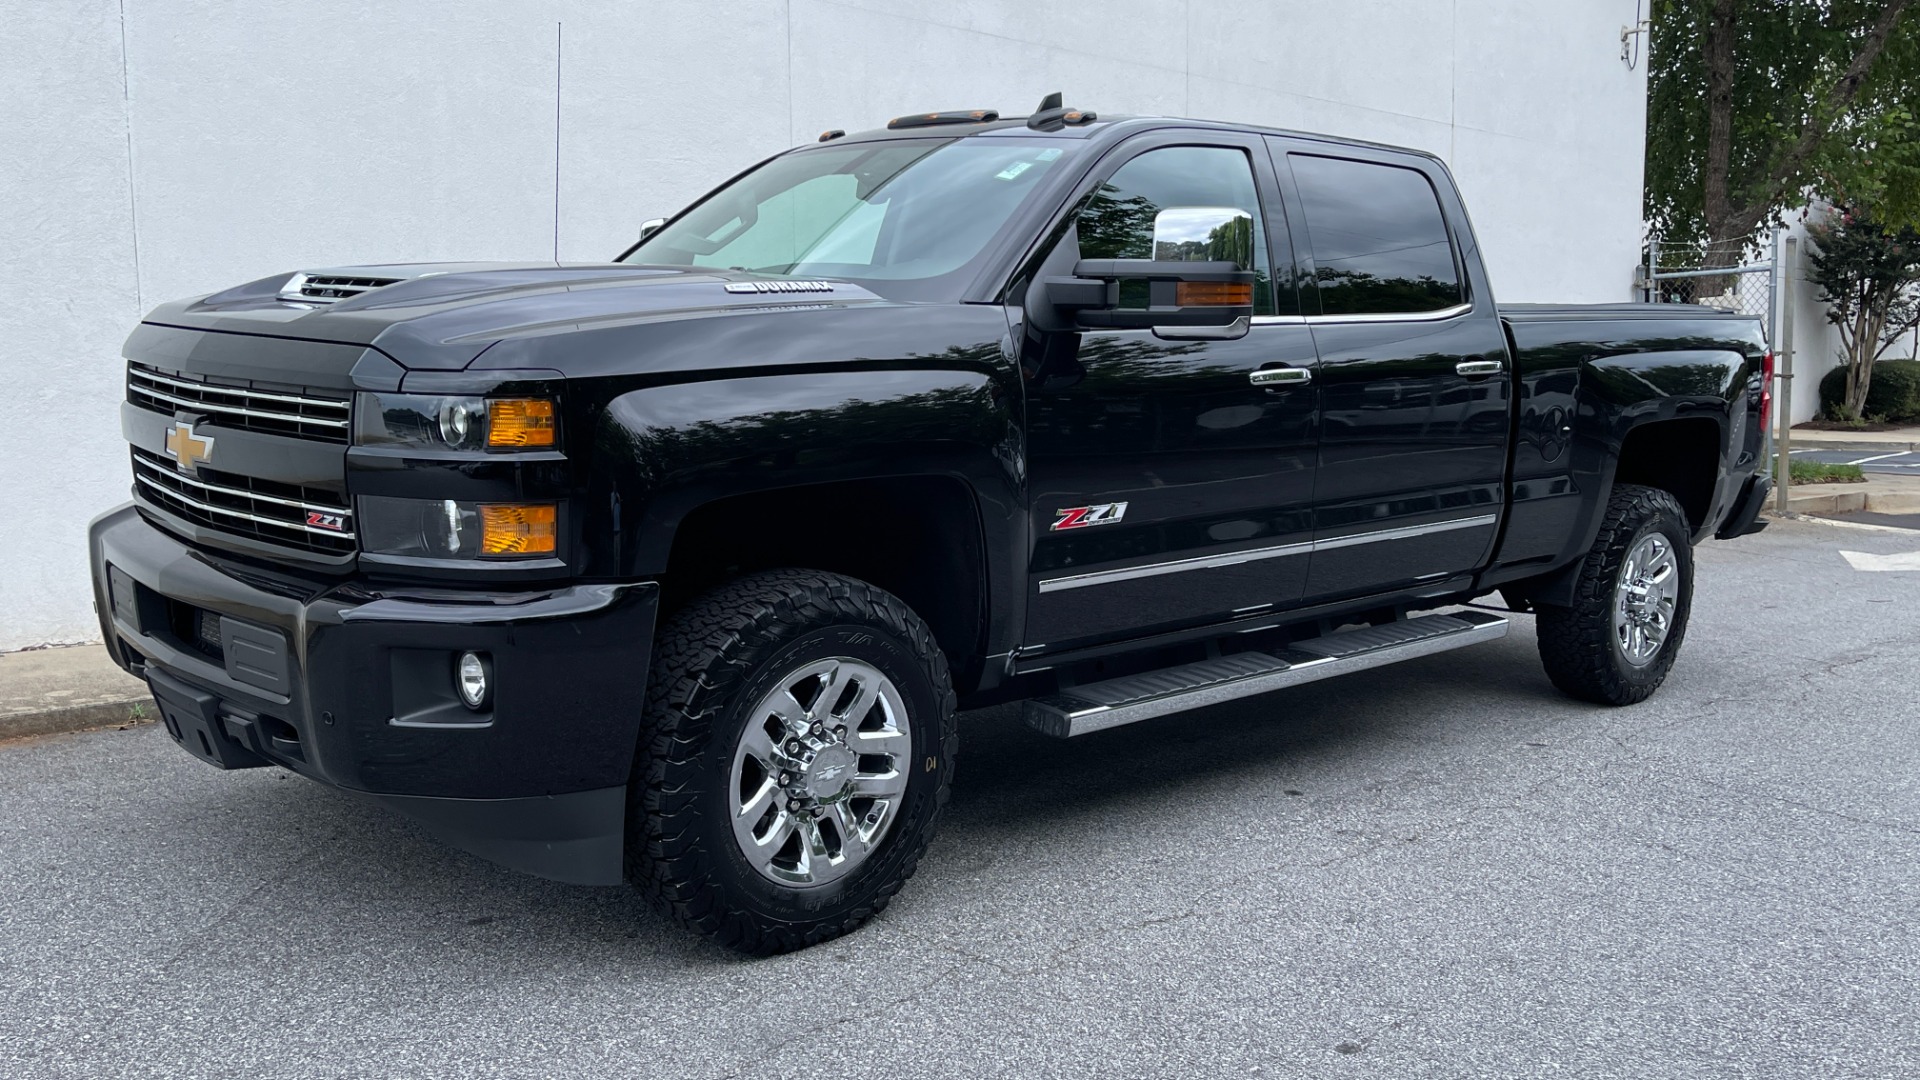 Used 2018 Chevrolet Silverado 3500HD LTZ / DURAMAX PLUS PACKAGE / SPORT EDITION / Z71 OFFROAD / SUNROOF / LEATHE for sale Sold at Formula Imports in Charlotte NC 28227 3